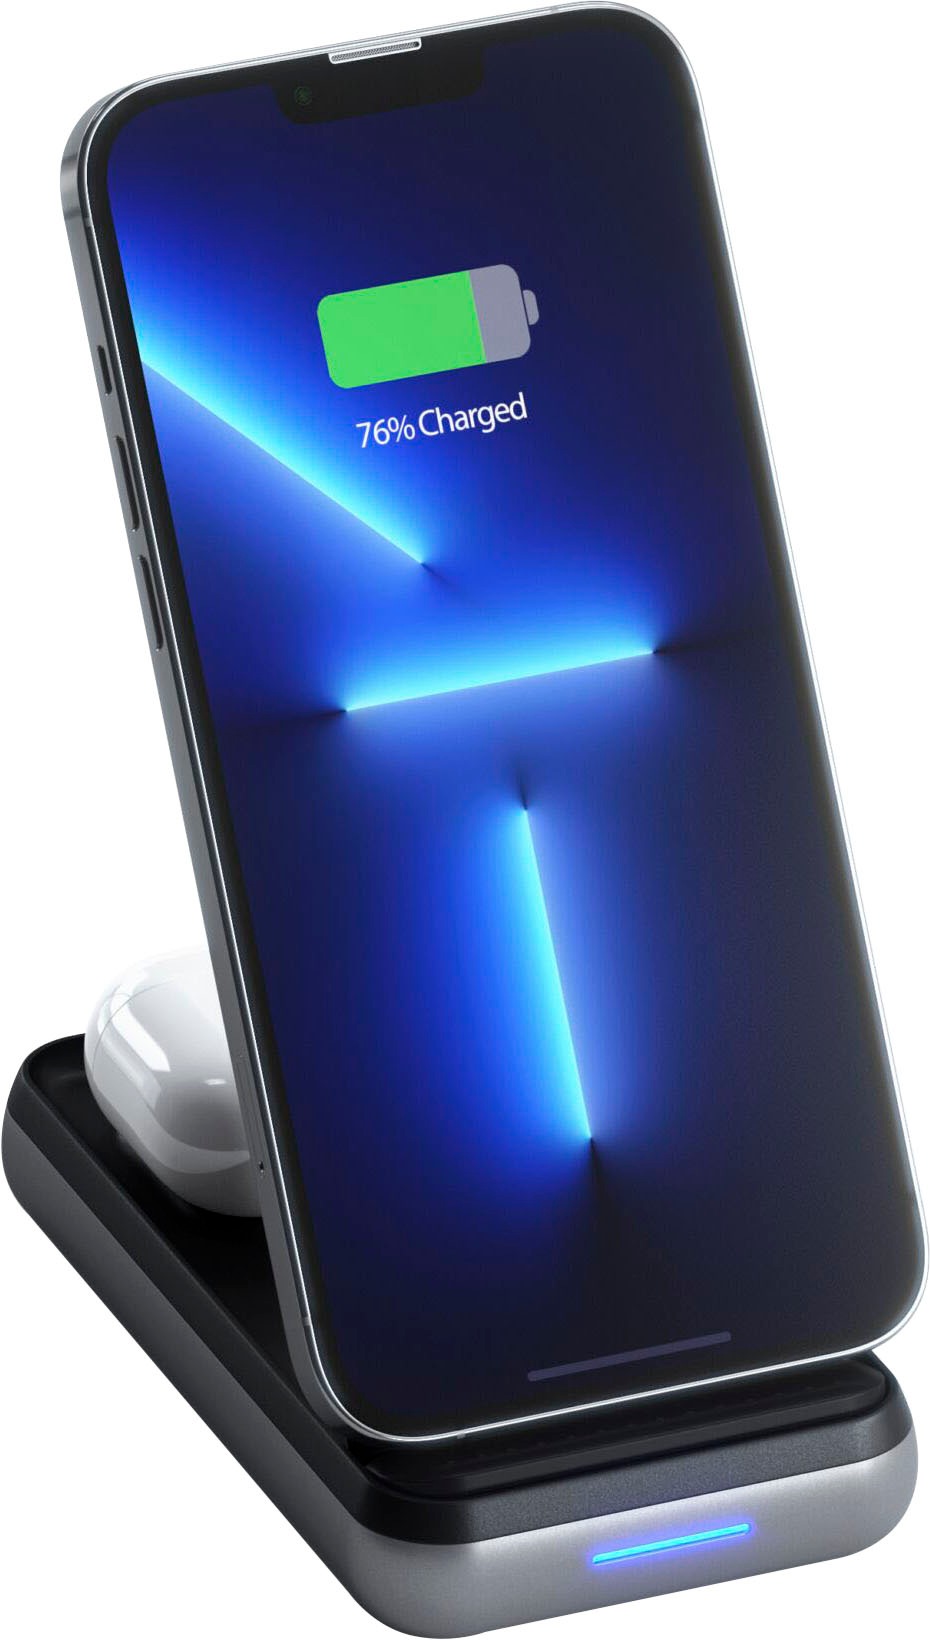 Satechi Smartphone-Ladegerät »Duo Wireless Charger Stand« online